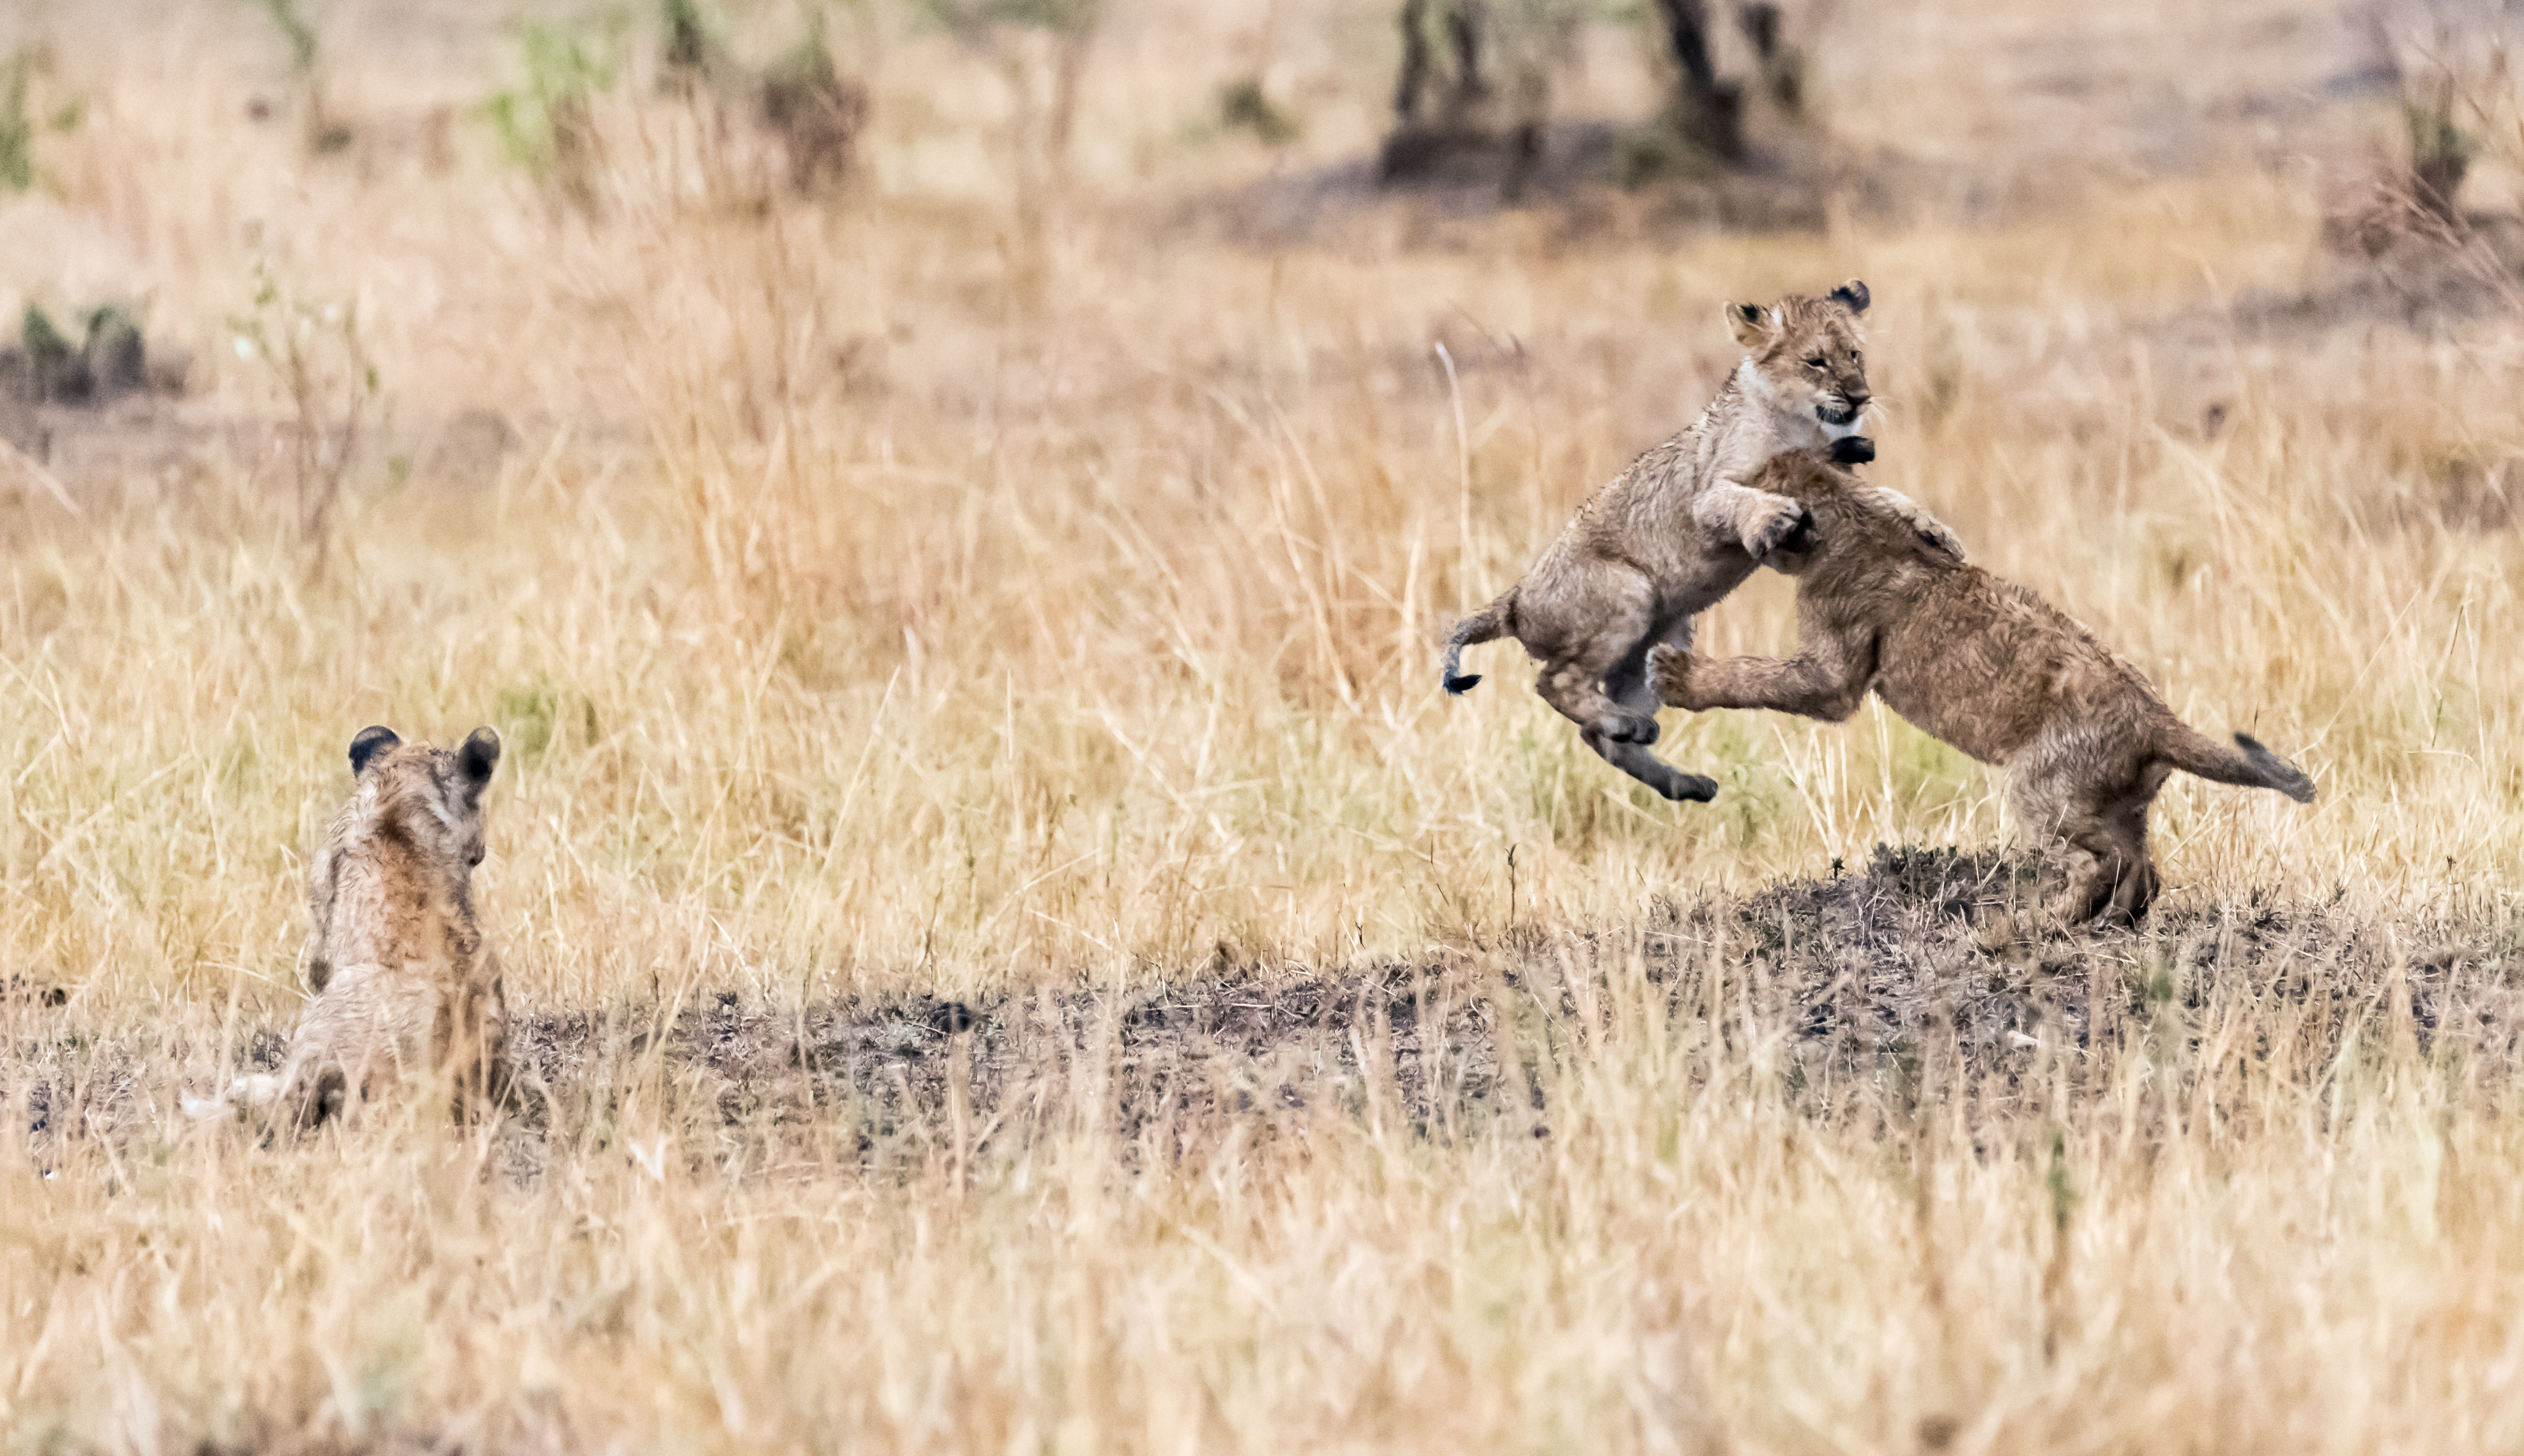 Two cubs leaping off the ground while a third looks on